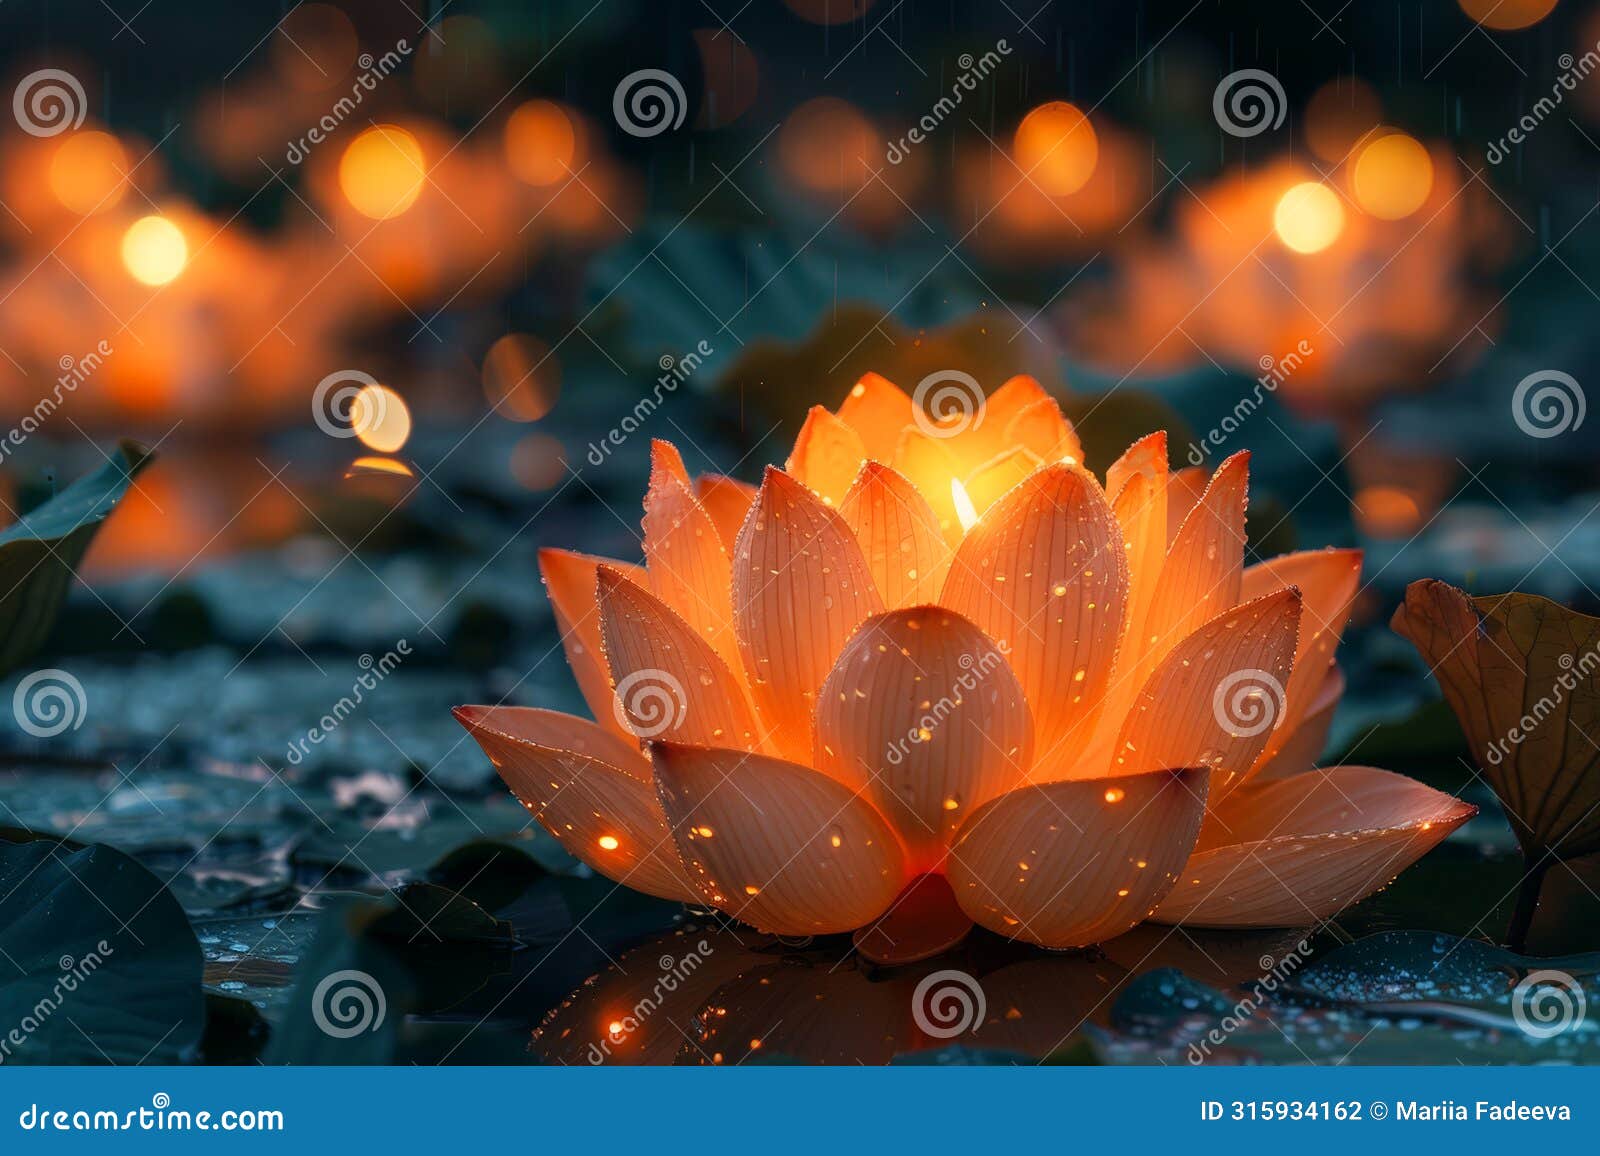 glowing lotus flower on water at night with rain, conveys calm and peacefulness. vesak day greeting card.